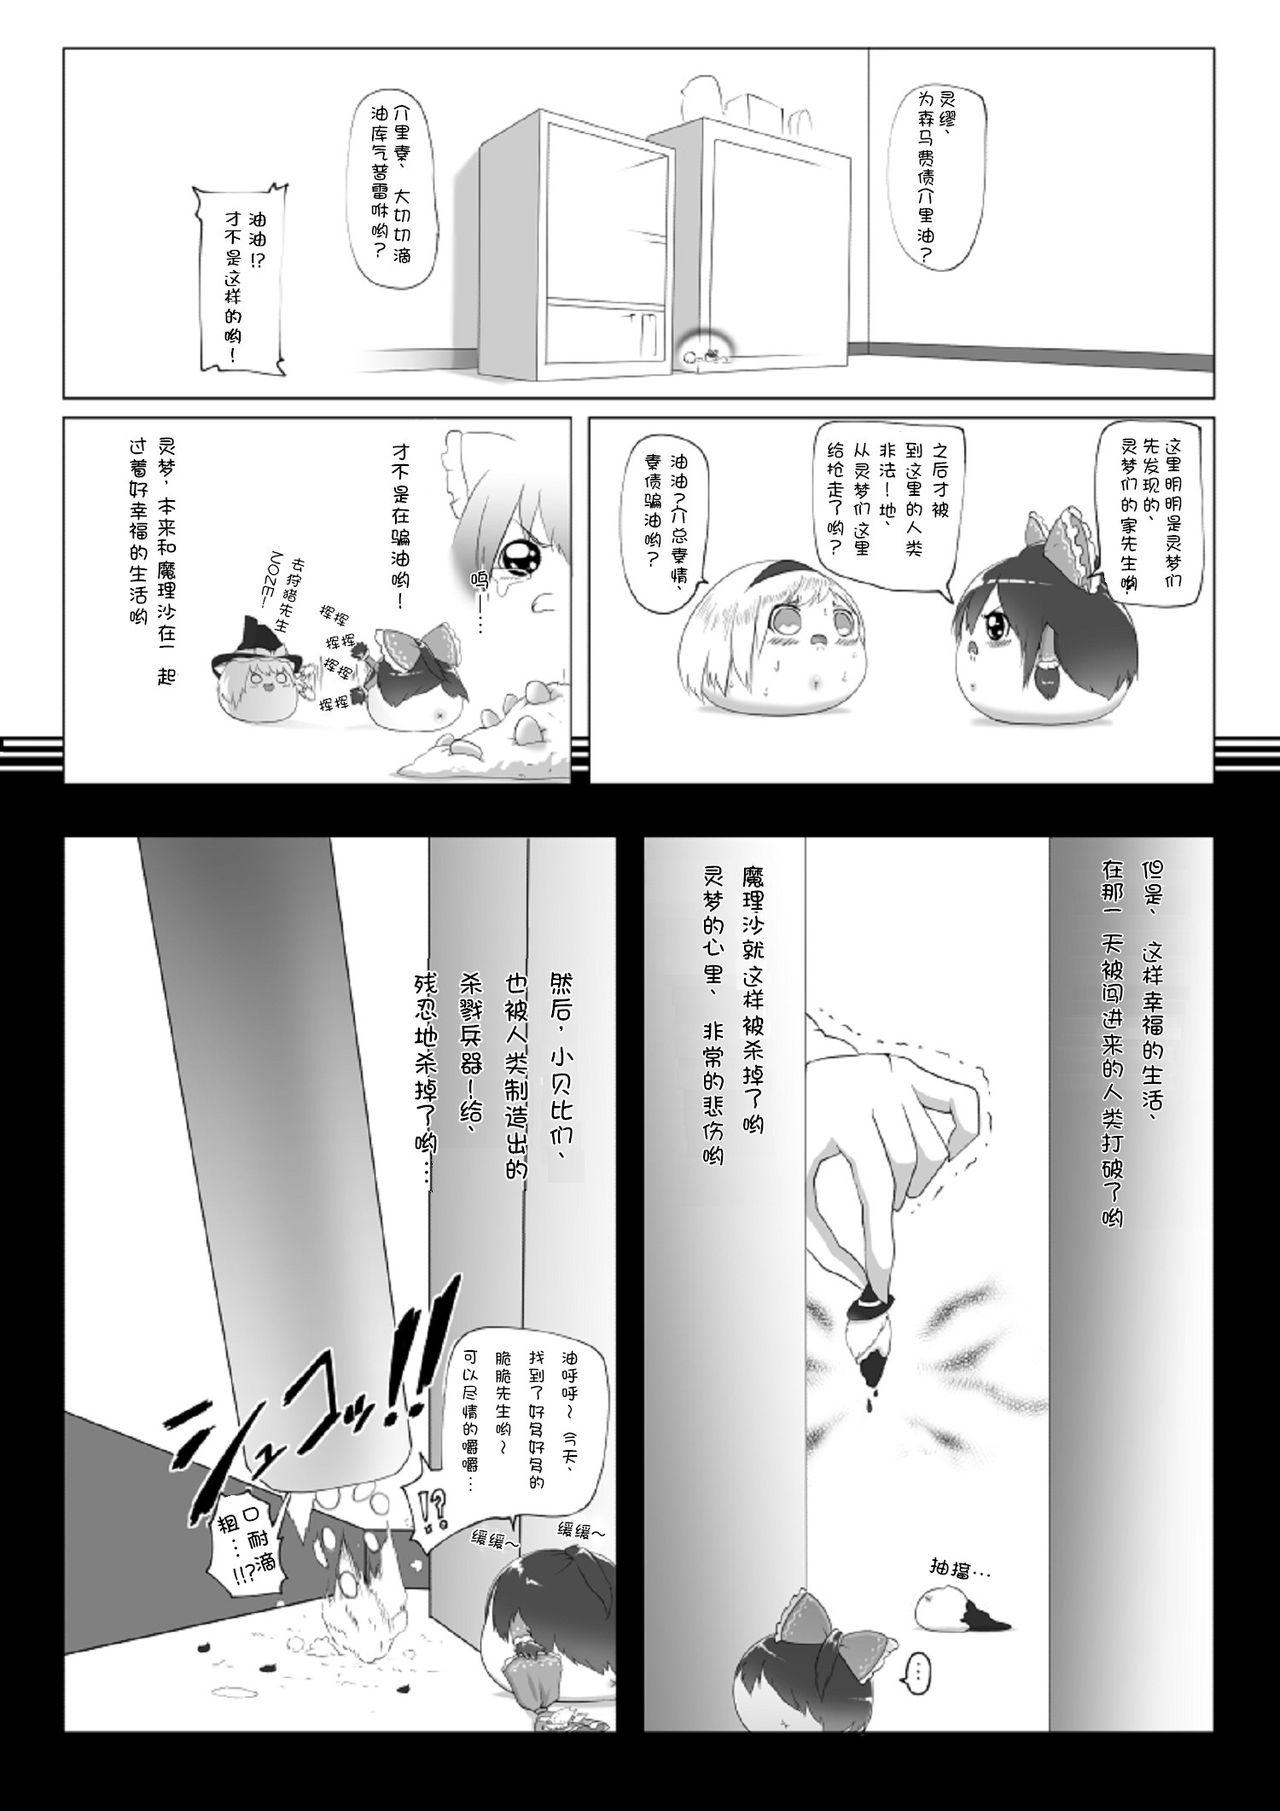 Nipple ゆっくりがかってにはえてくるわけ（Chinese) - Touhou project Cheating Wife - Page 5